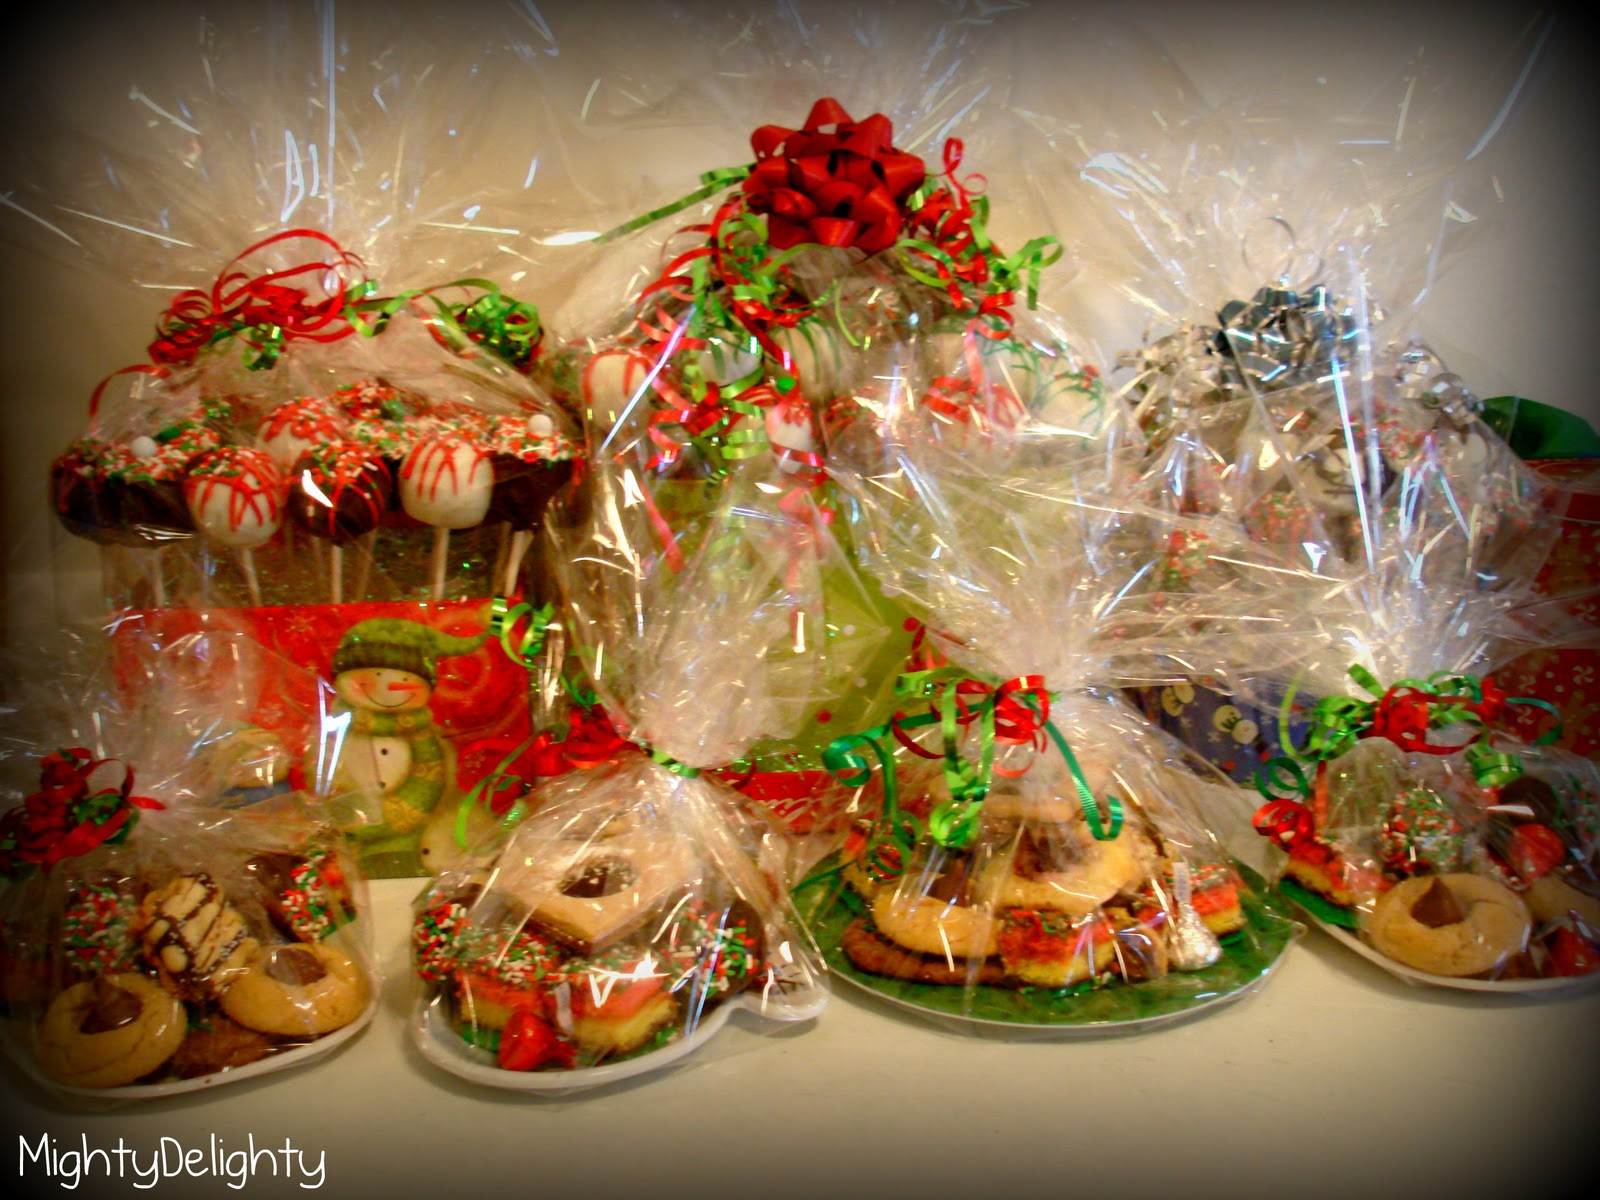 Holiday Cookies Gift Ideas
 Mighty Delighty December 2011